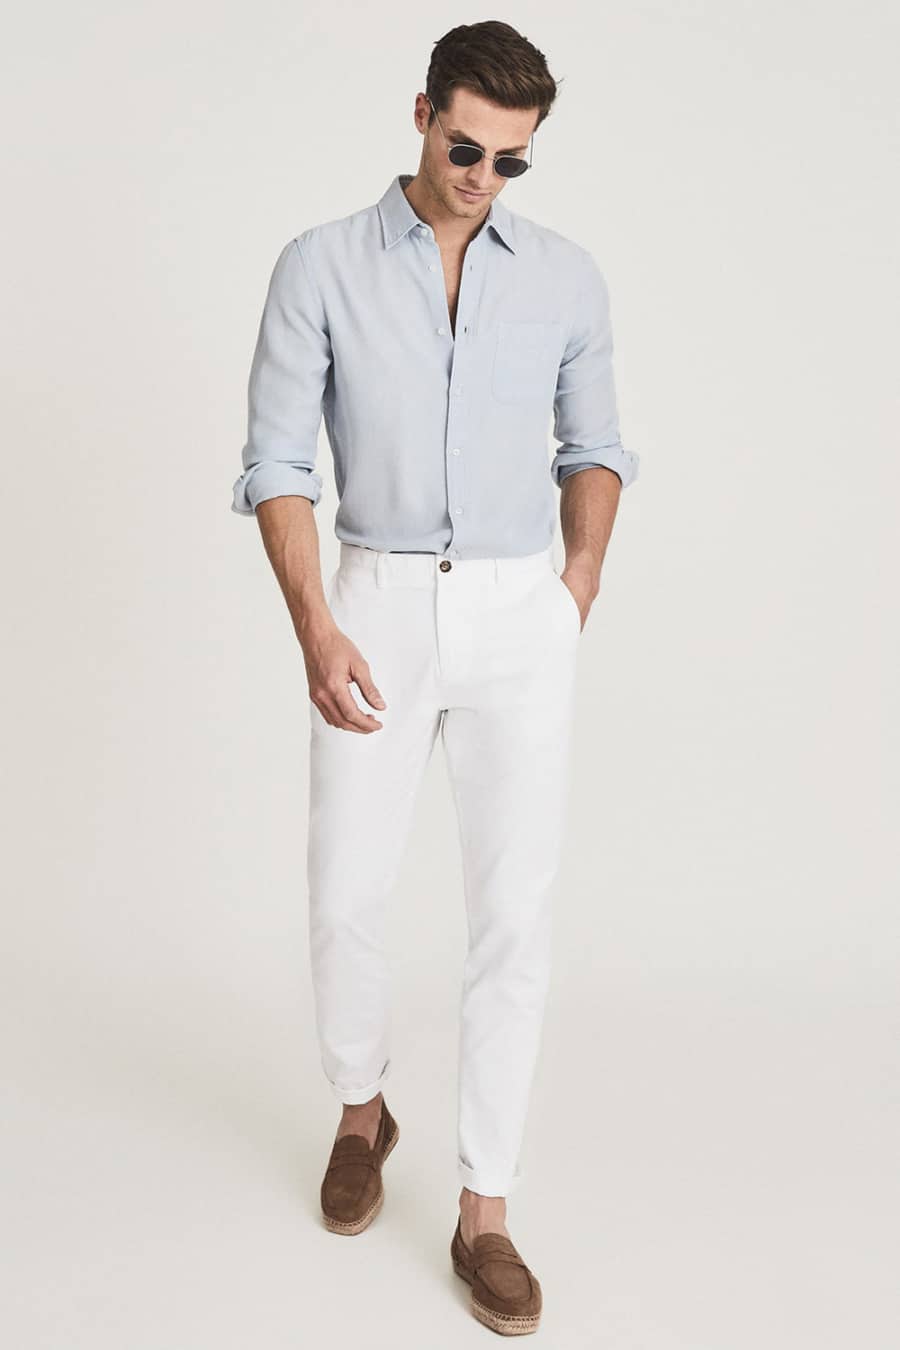 Men's white pants, light blue shirt and brown suede loafers outfit